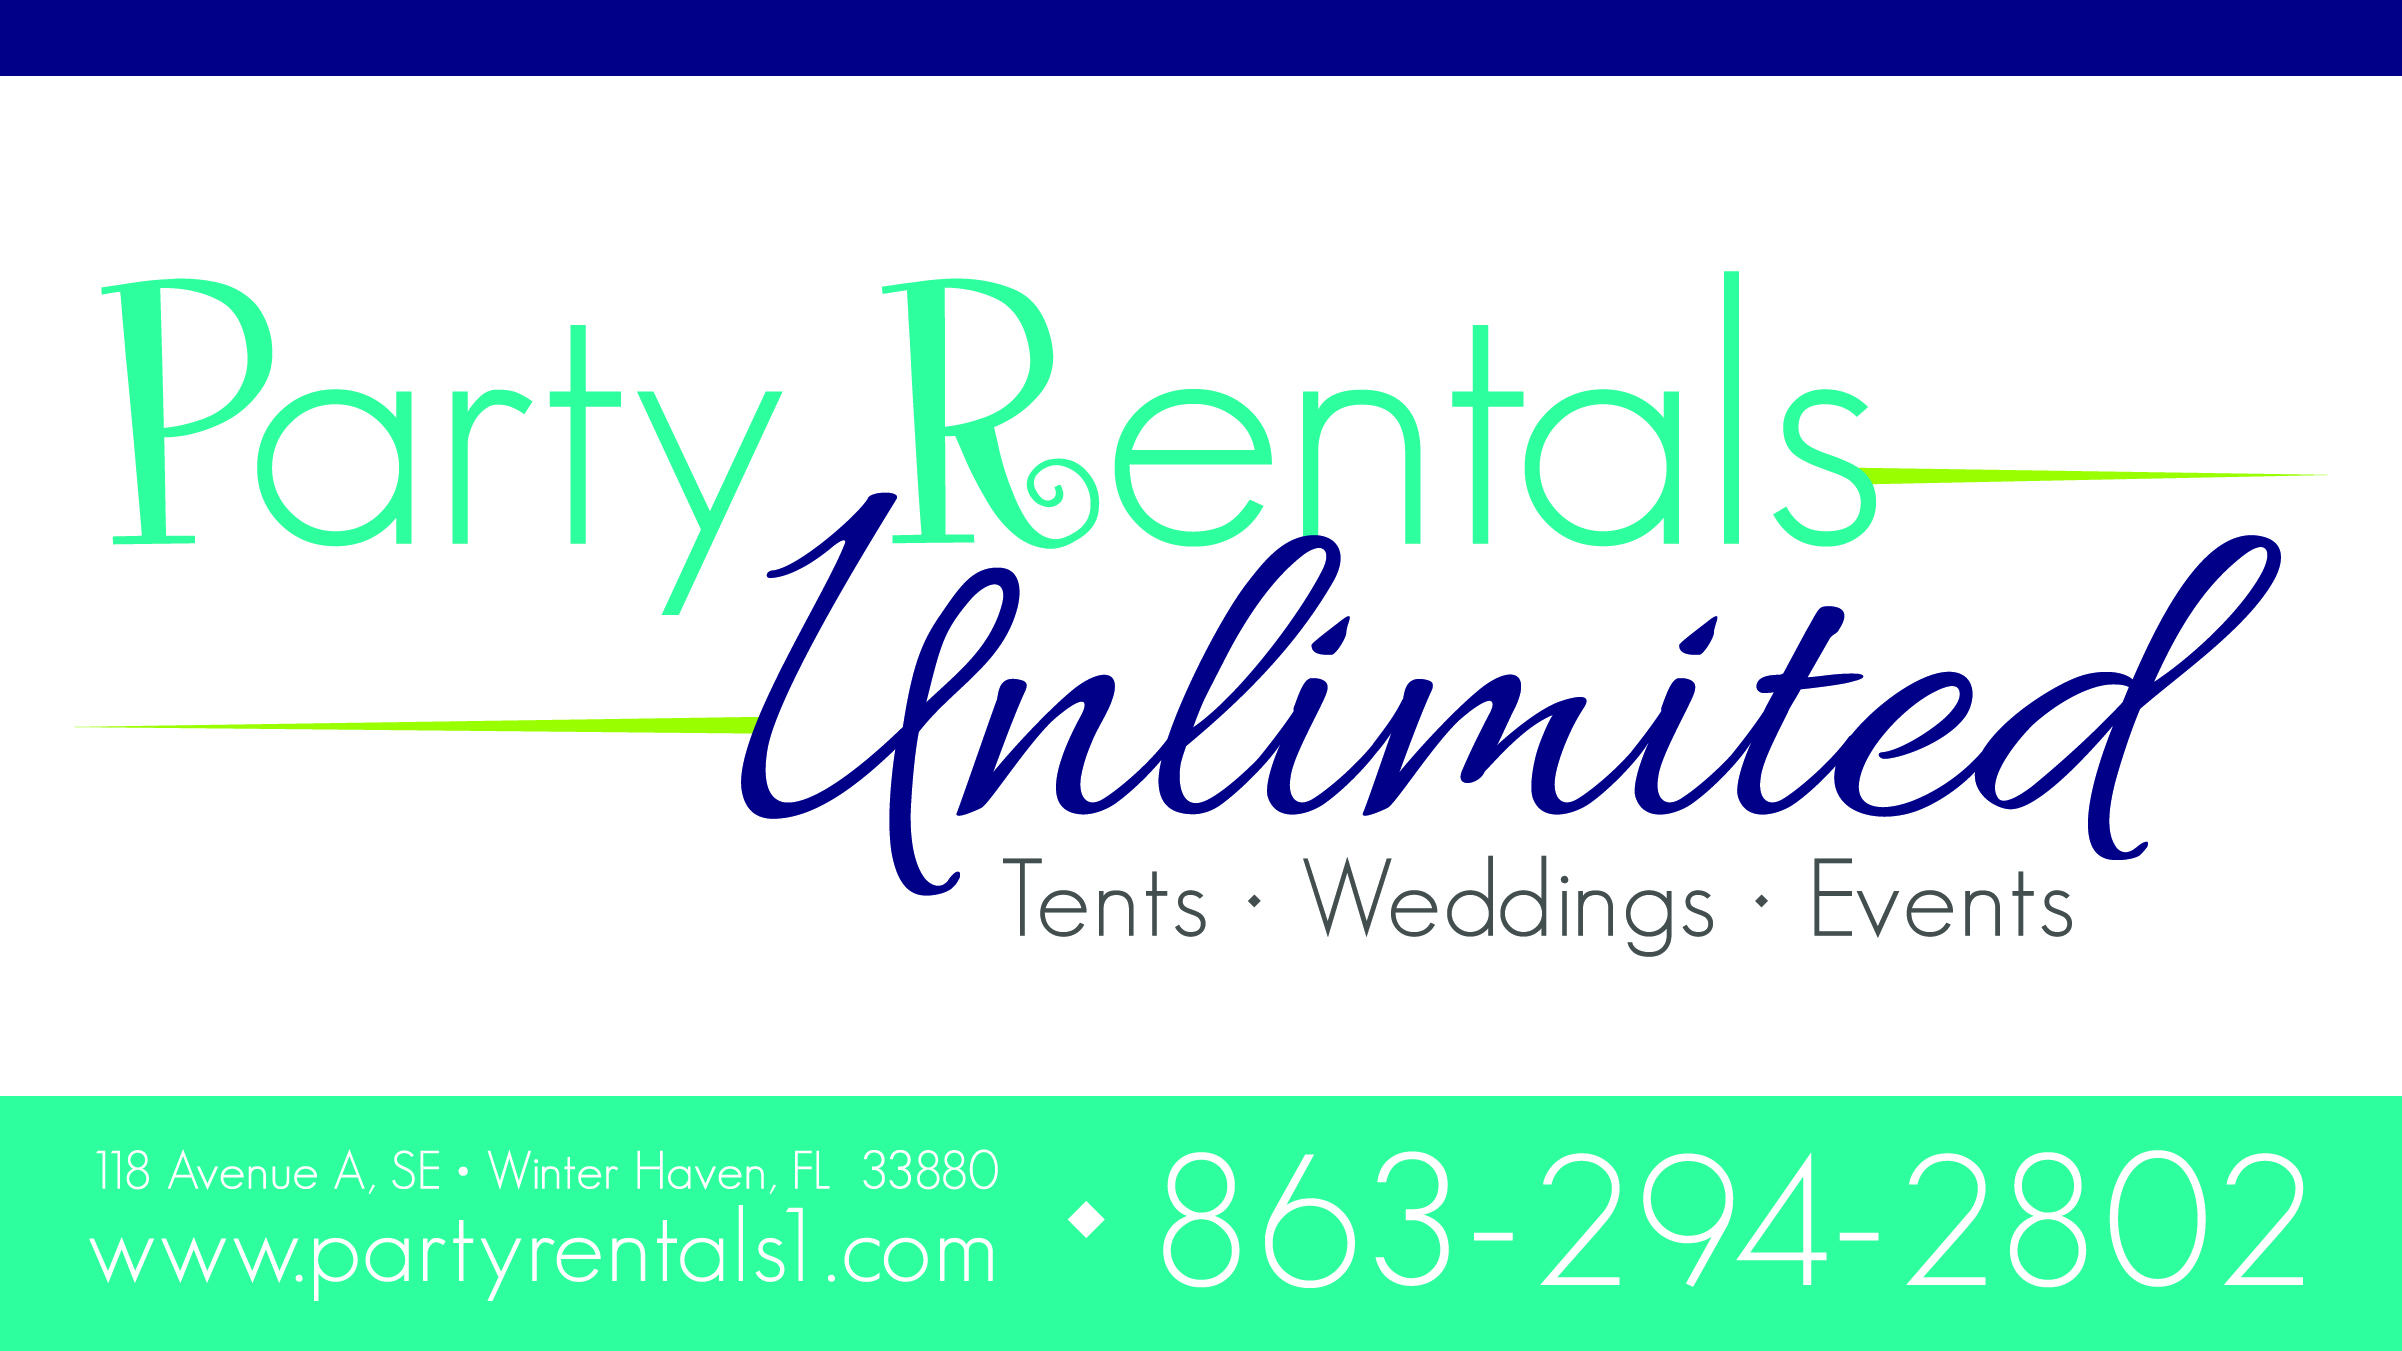 Party Rentals Unlimited 